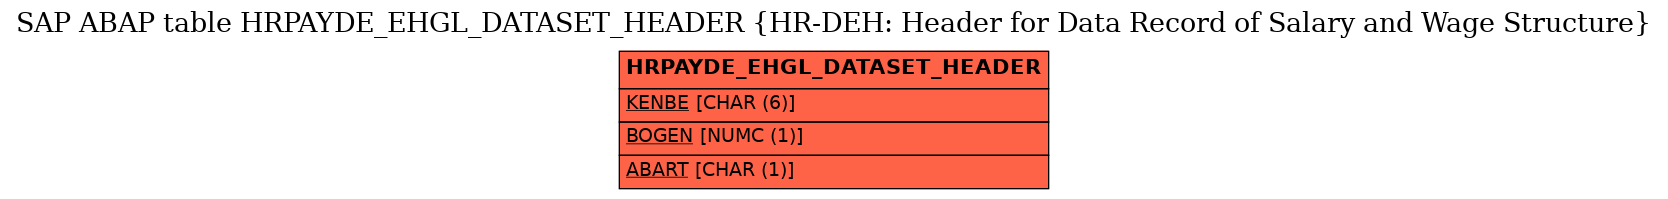 E-R Diagram for table HRPAYDE_EHGL_DATASET_HEADER (HR-DEH: Header for Data Record of Salary and Wage Structure)